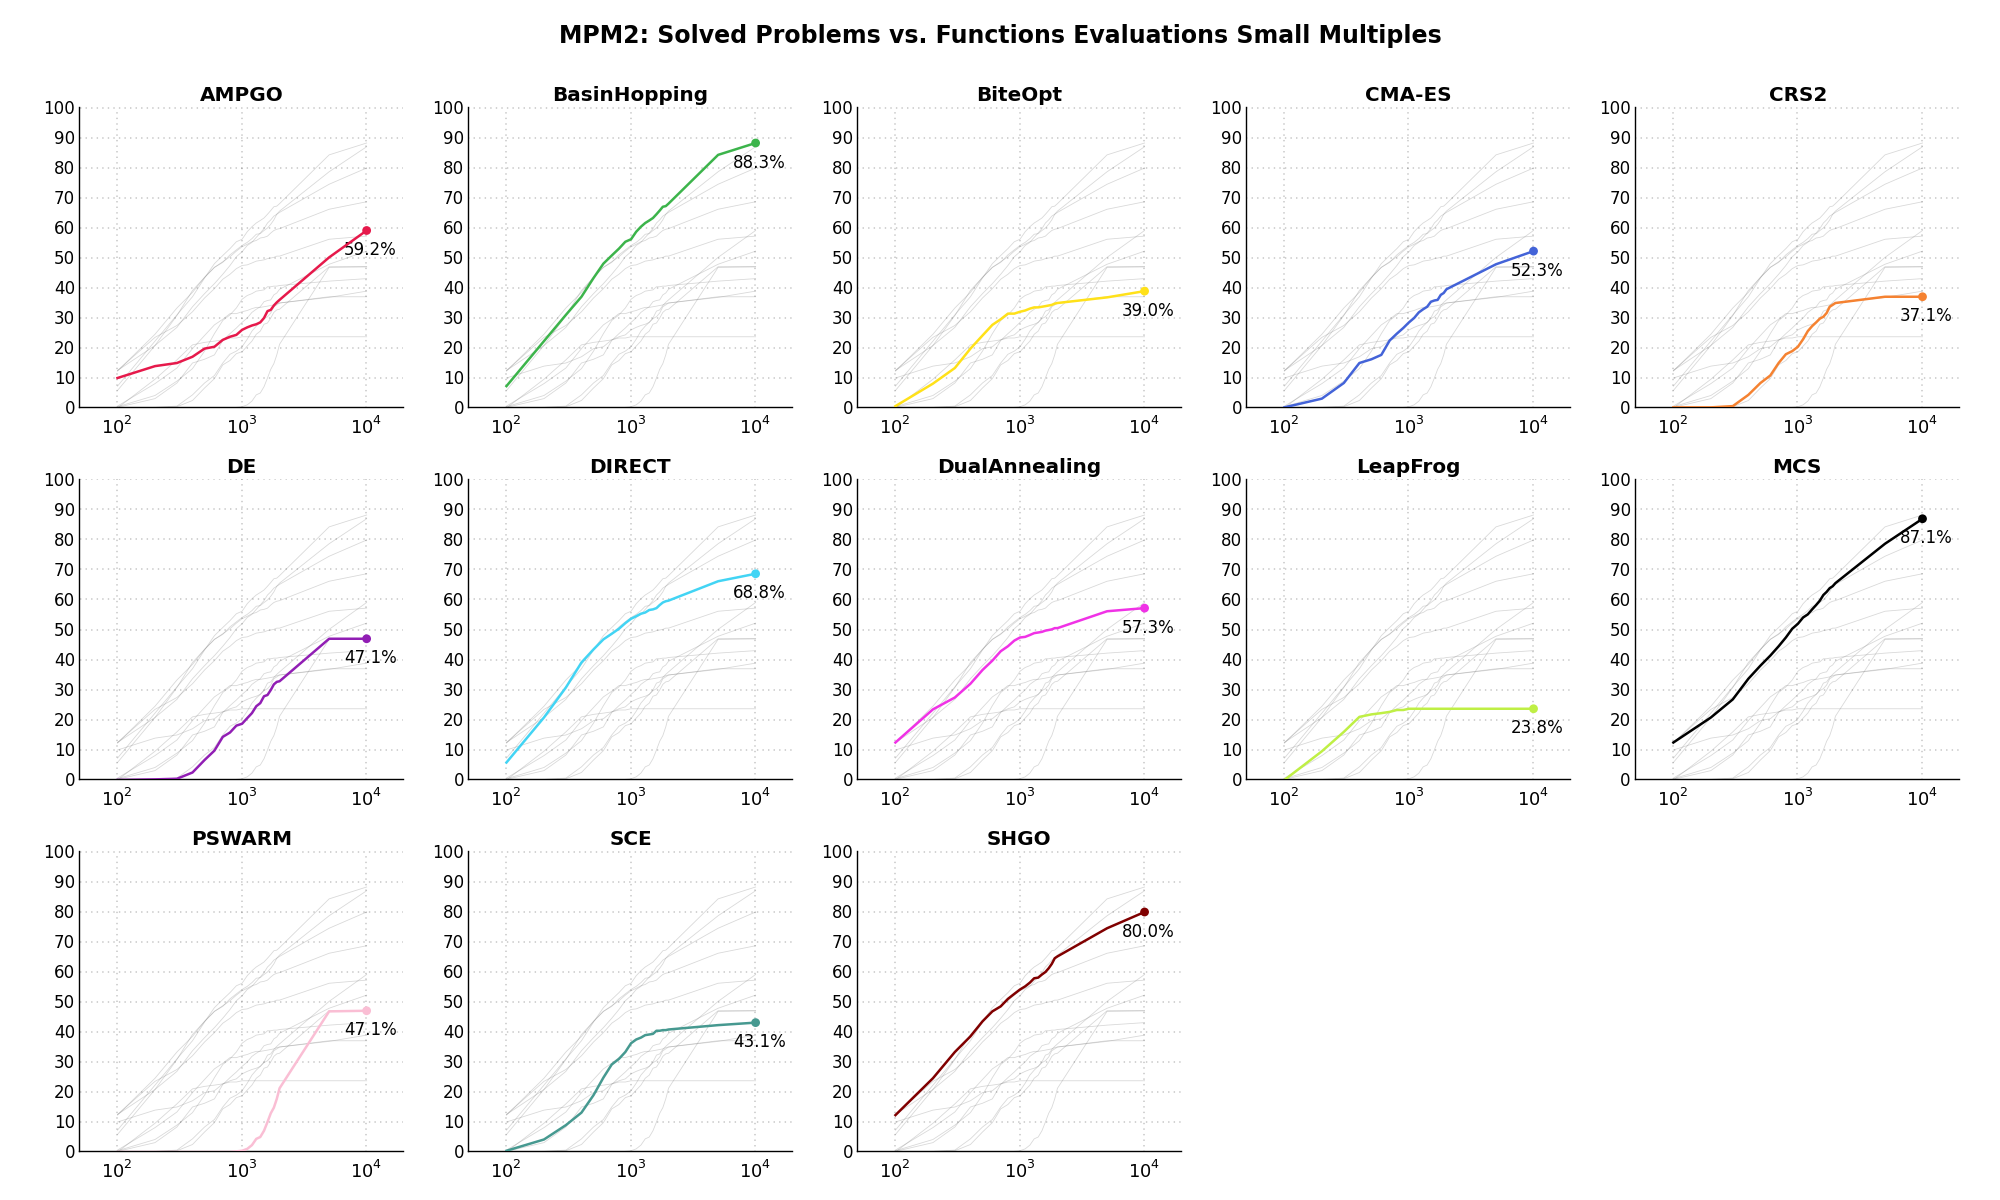 Percentage of problems solved given a fixed number of function evaluations on the MPM2 test suite